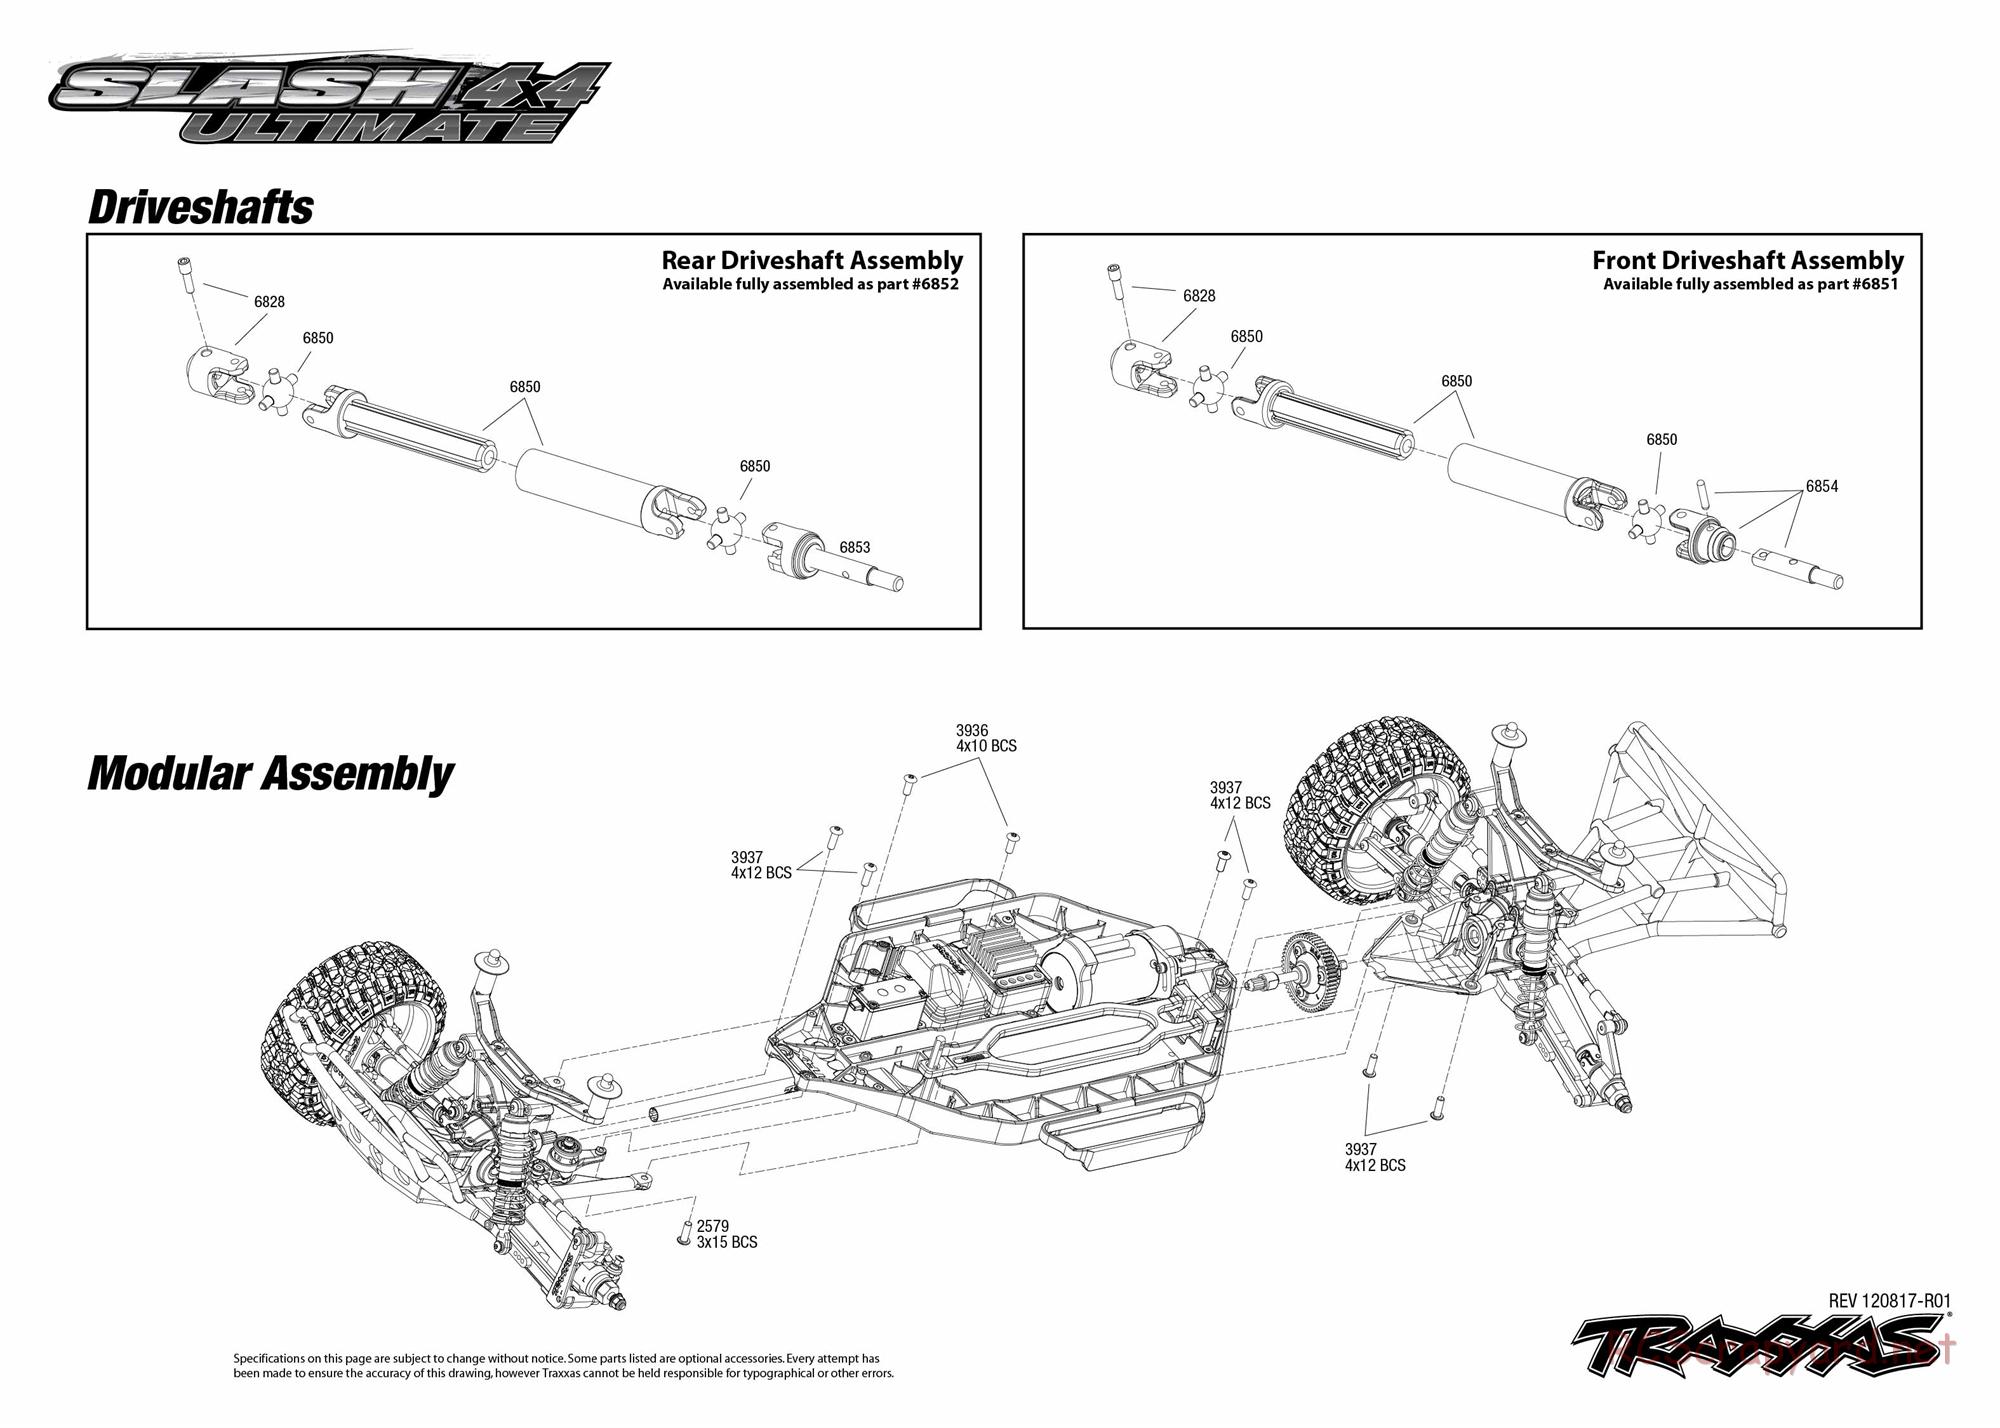 Traxxas - Slash 4x4 Ultimate - Exploded Views - Page 3